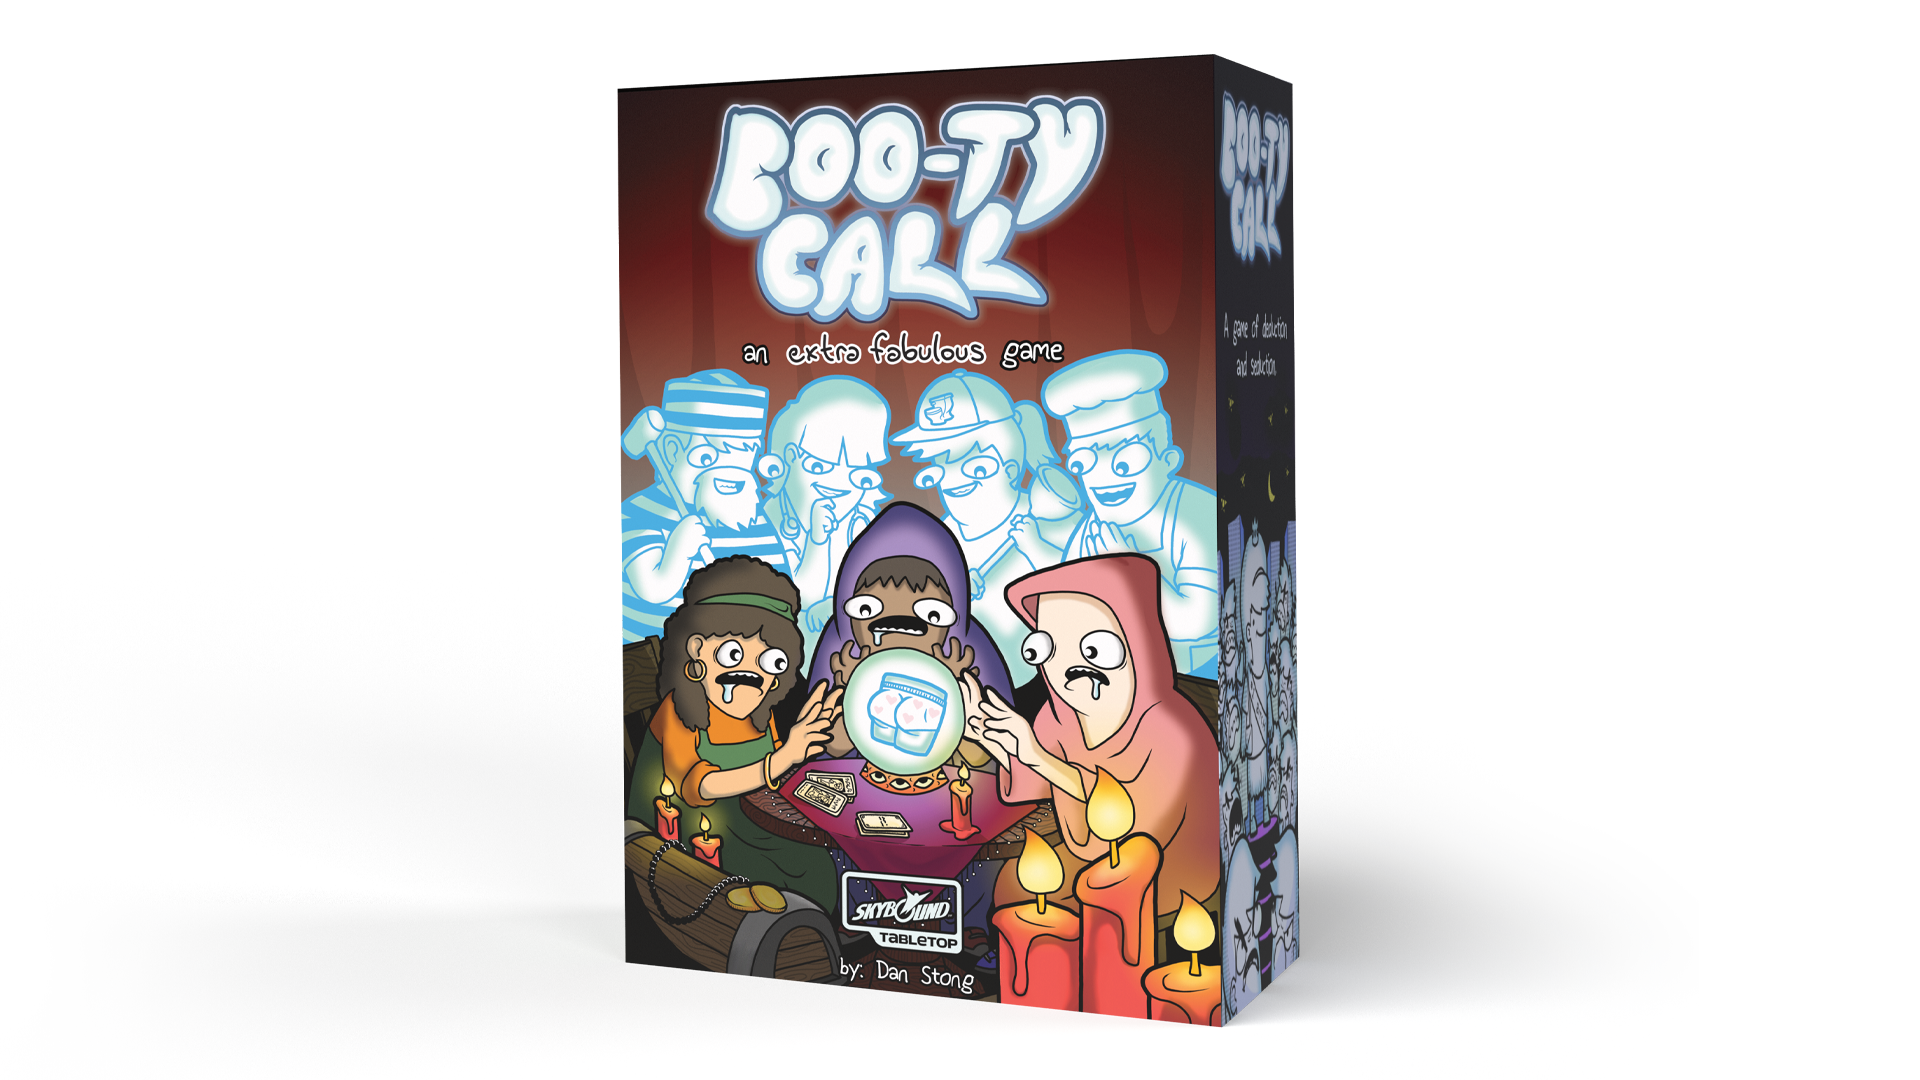 An image of the box for Boo-ty Call.